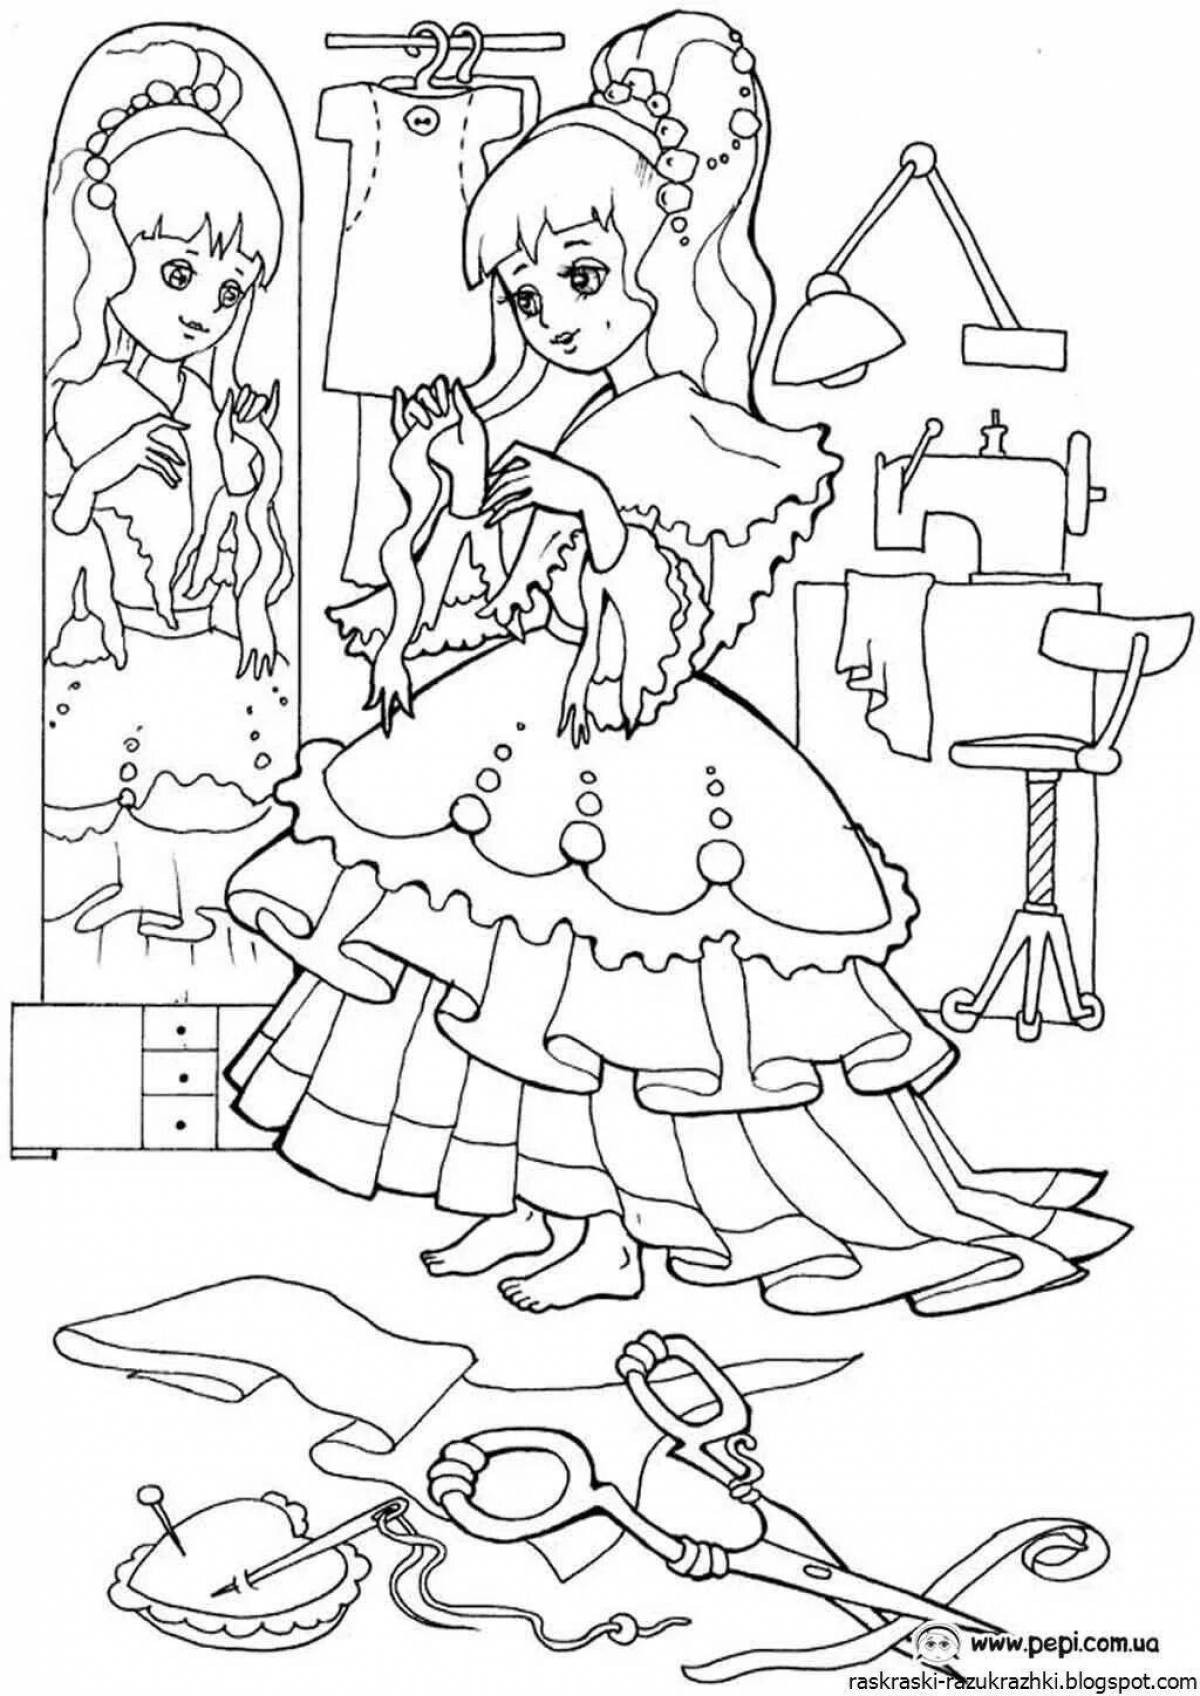 Exciting coloring pages for 6 year old girls